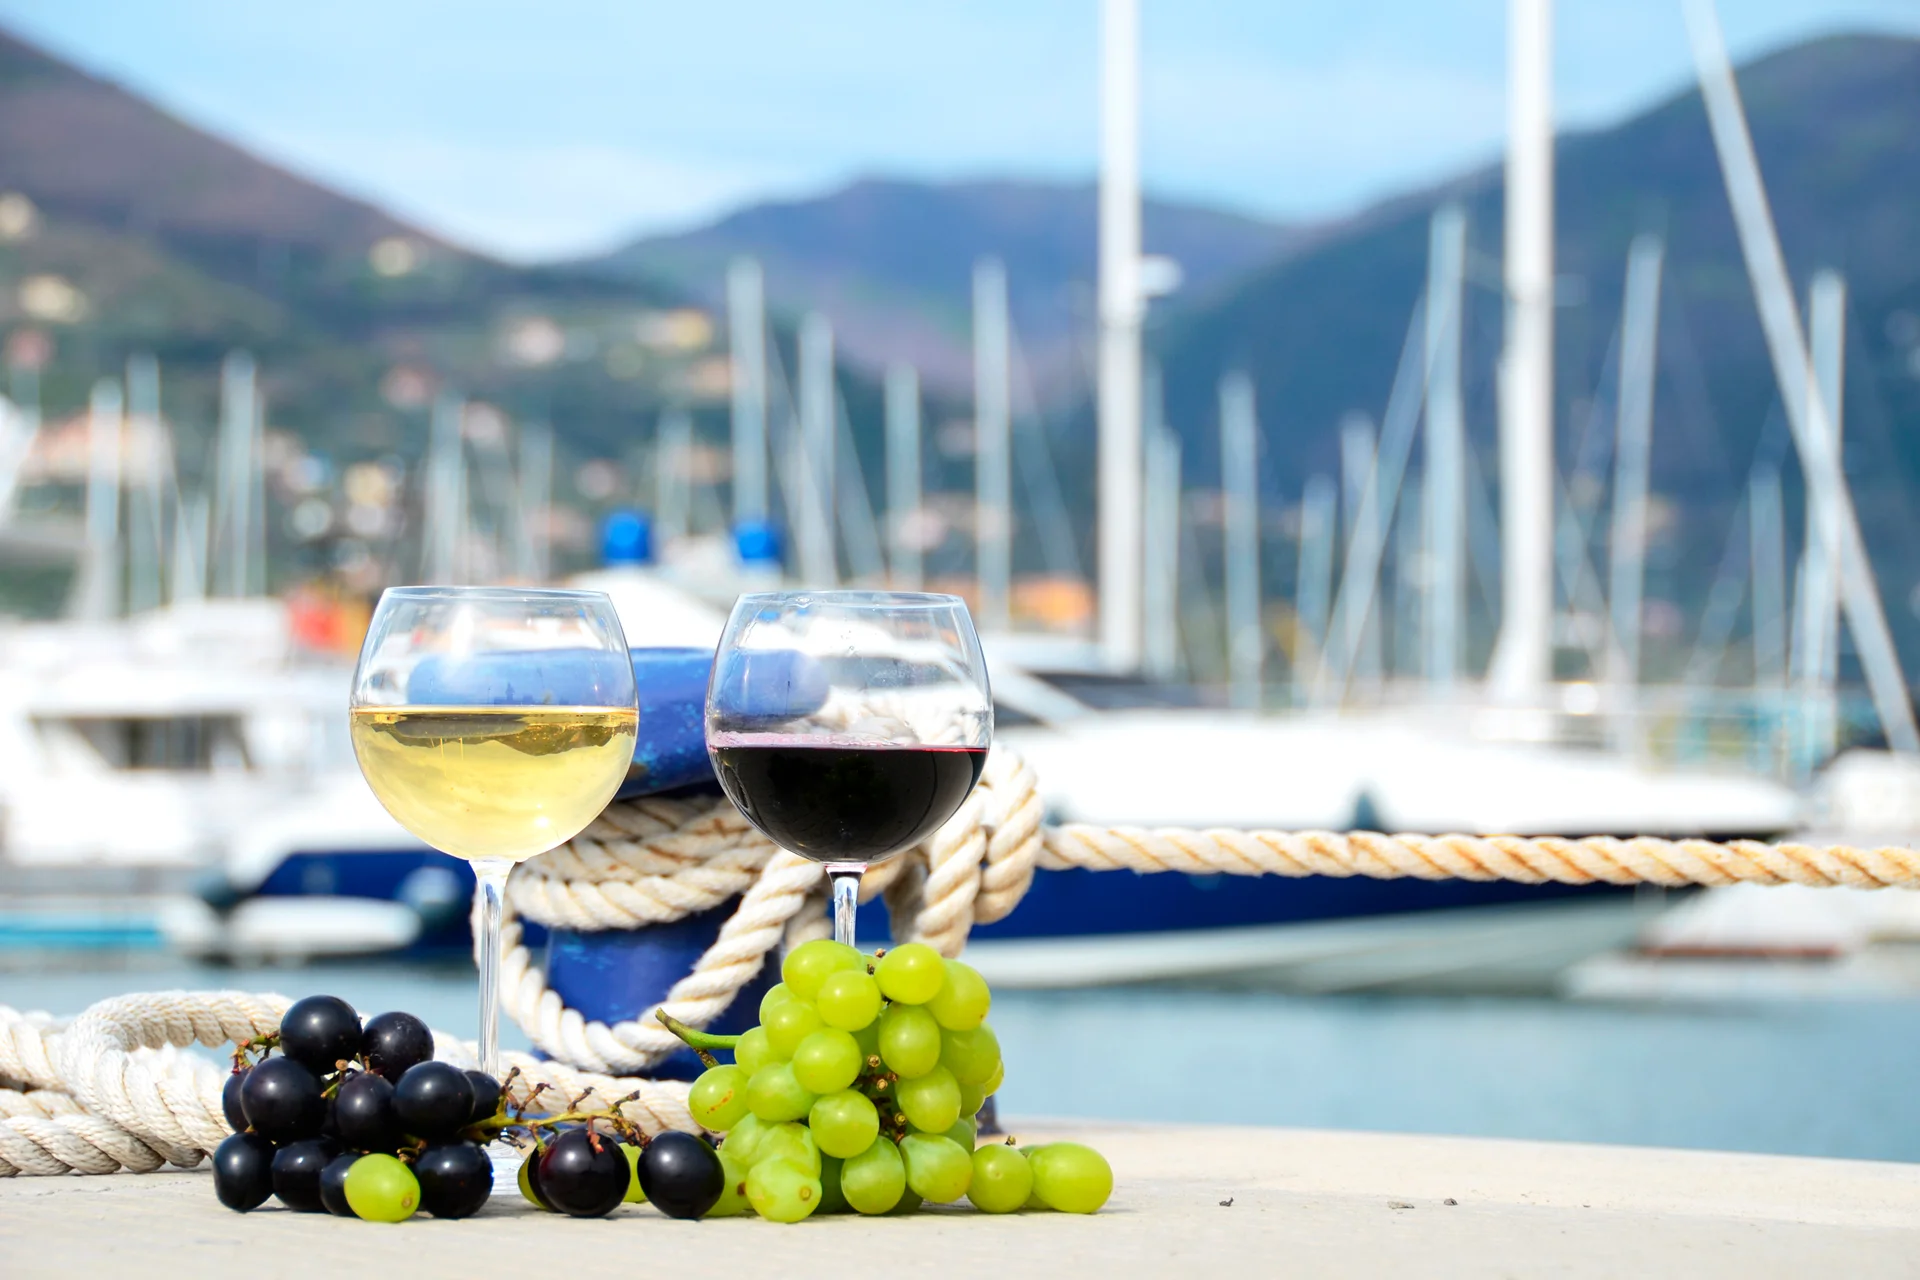 Italy wine and grapes in port yachts moored